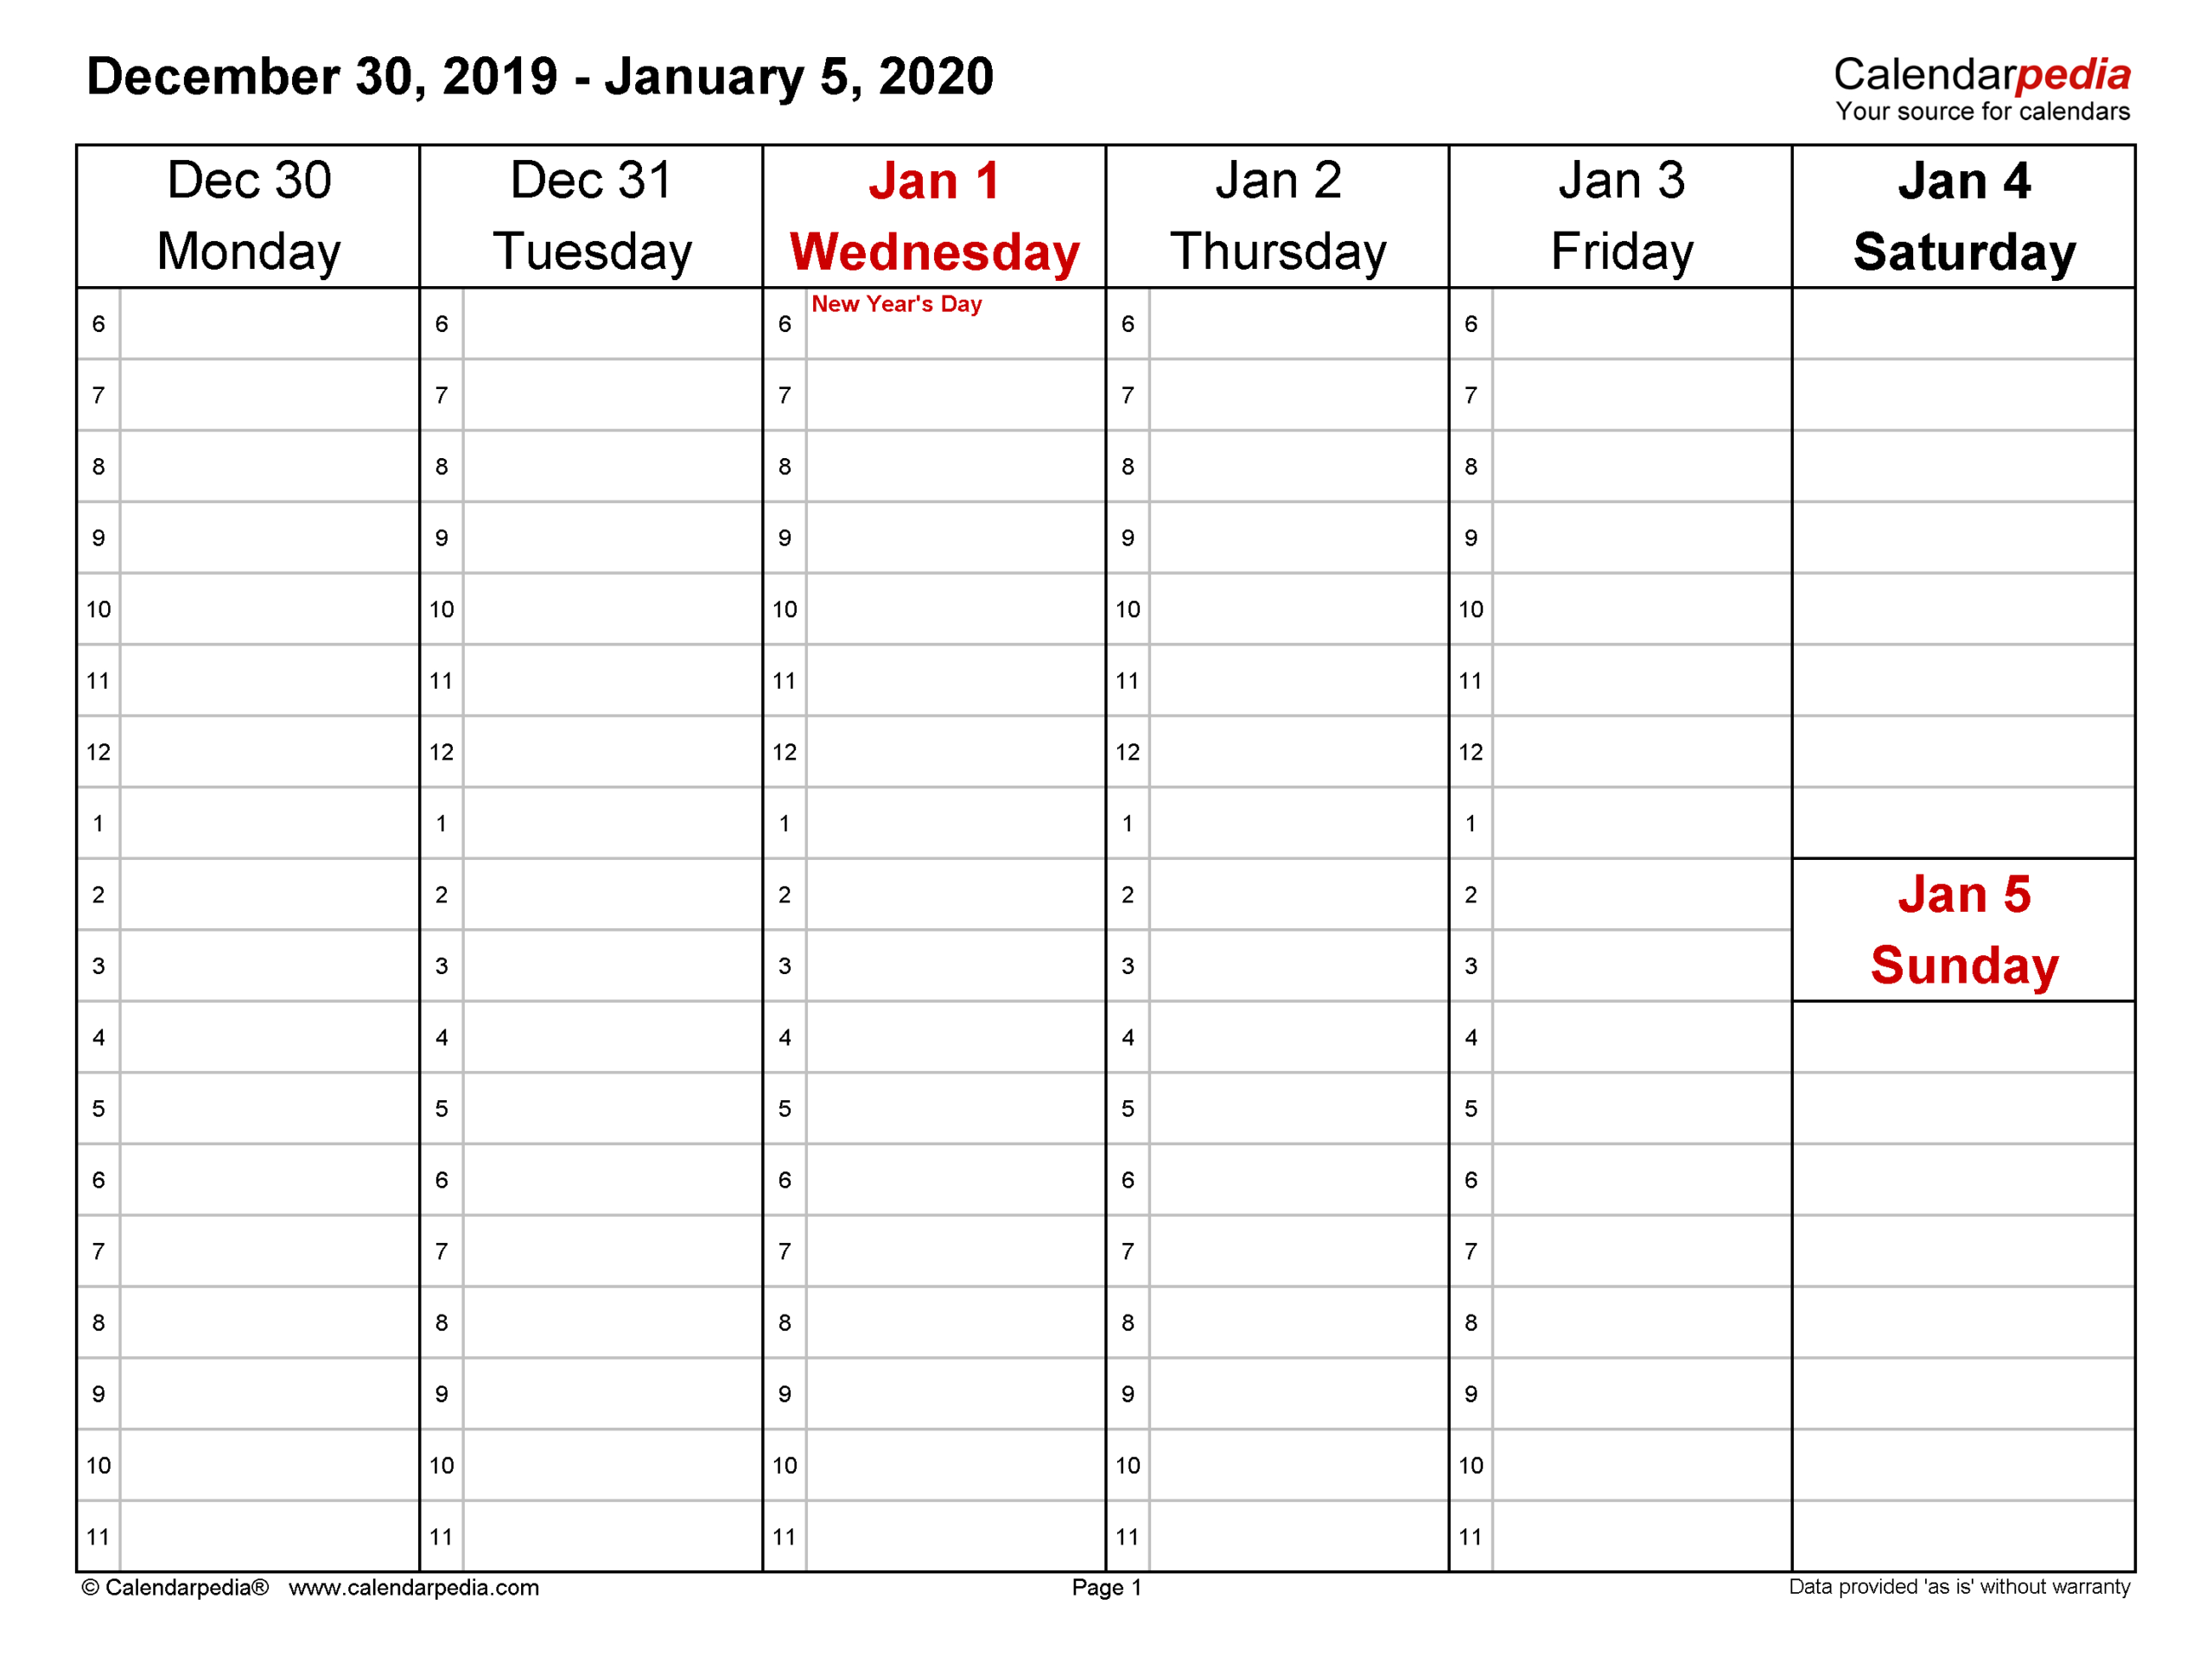 Weekly Calendars 2020 For Excel - 12 Free Printable Templates